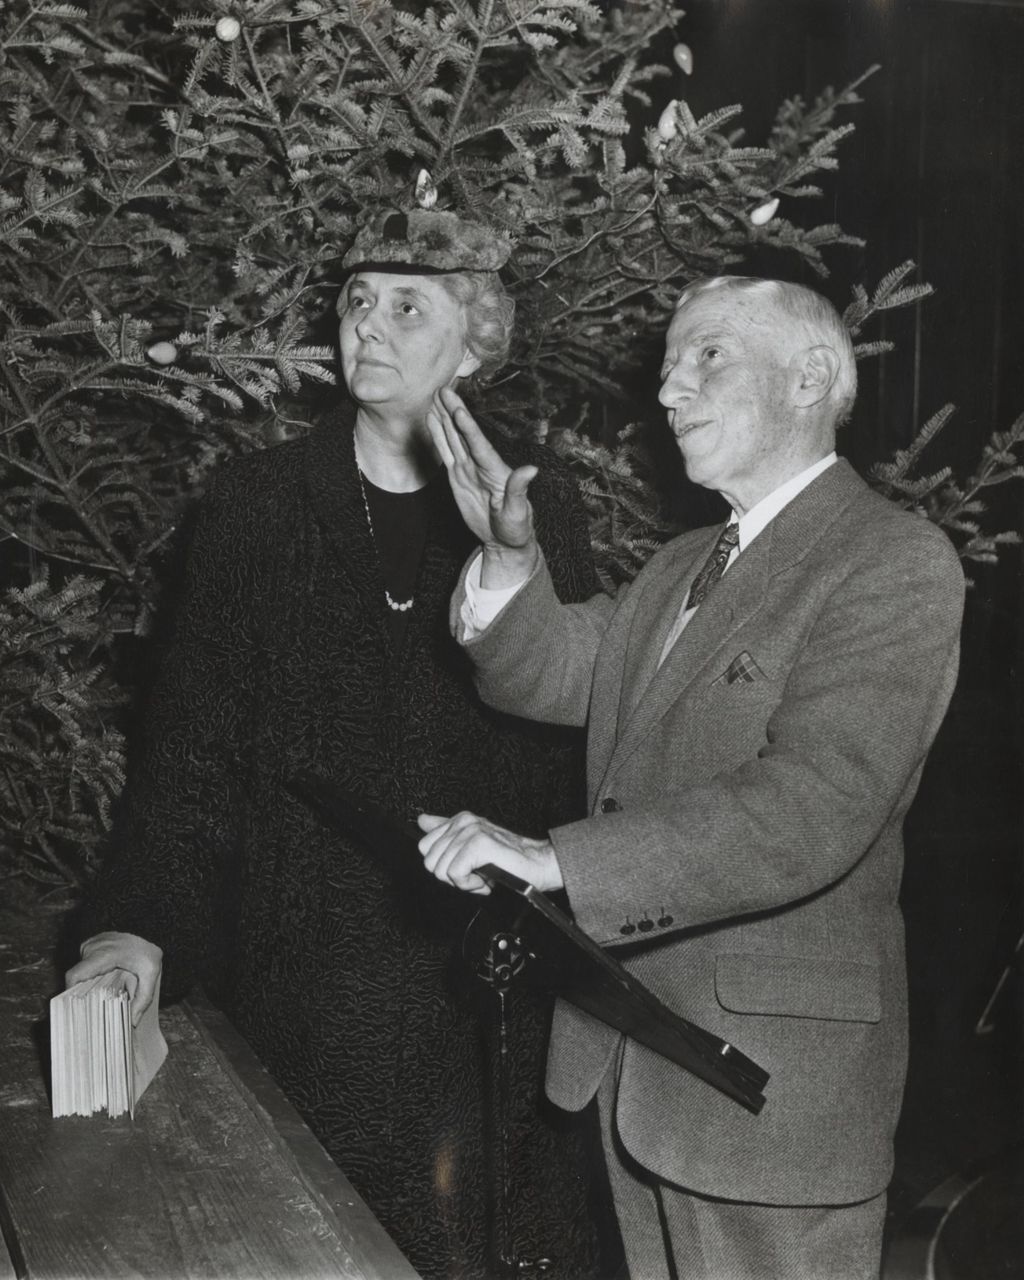 Hull-House board president Alma Petersen stands next to man at Hull-House event during Christmas season